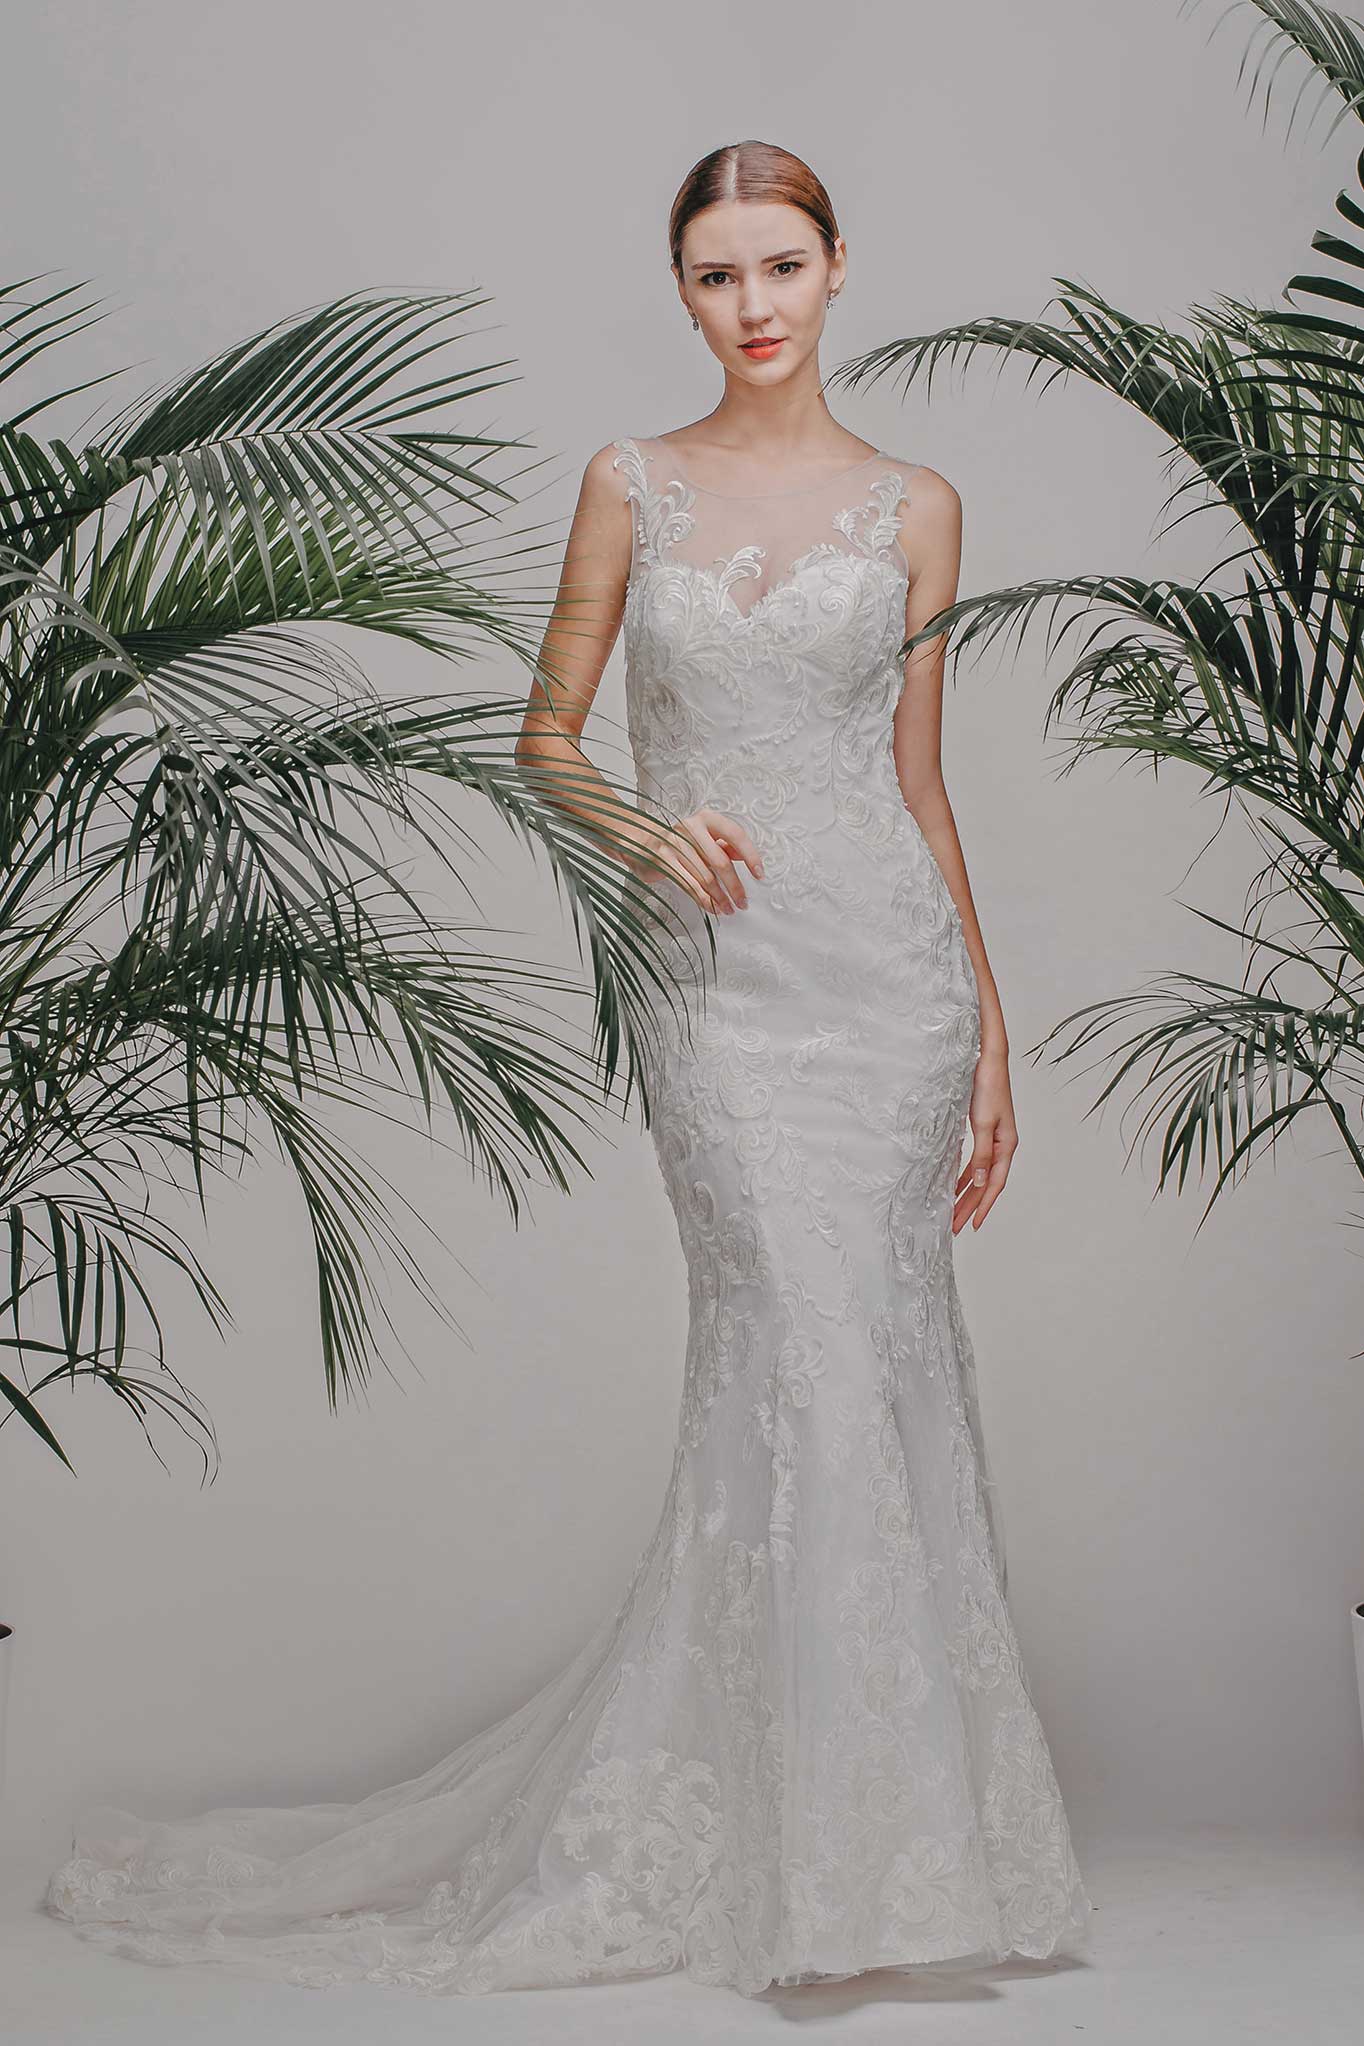 Odeliabridal-gown-collection-9_